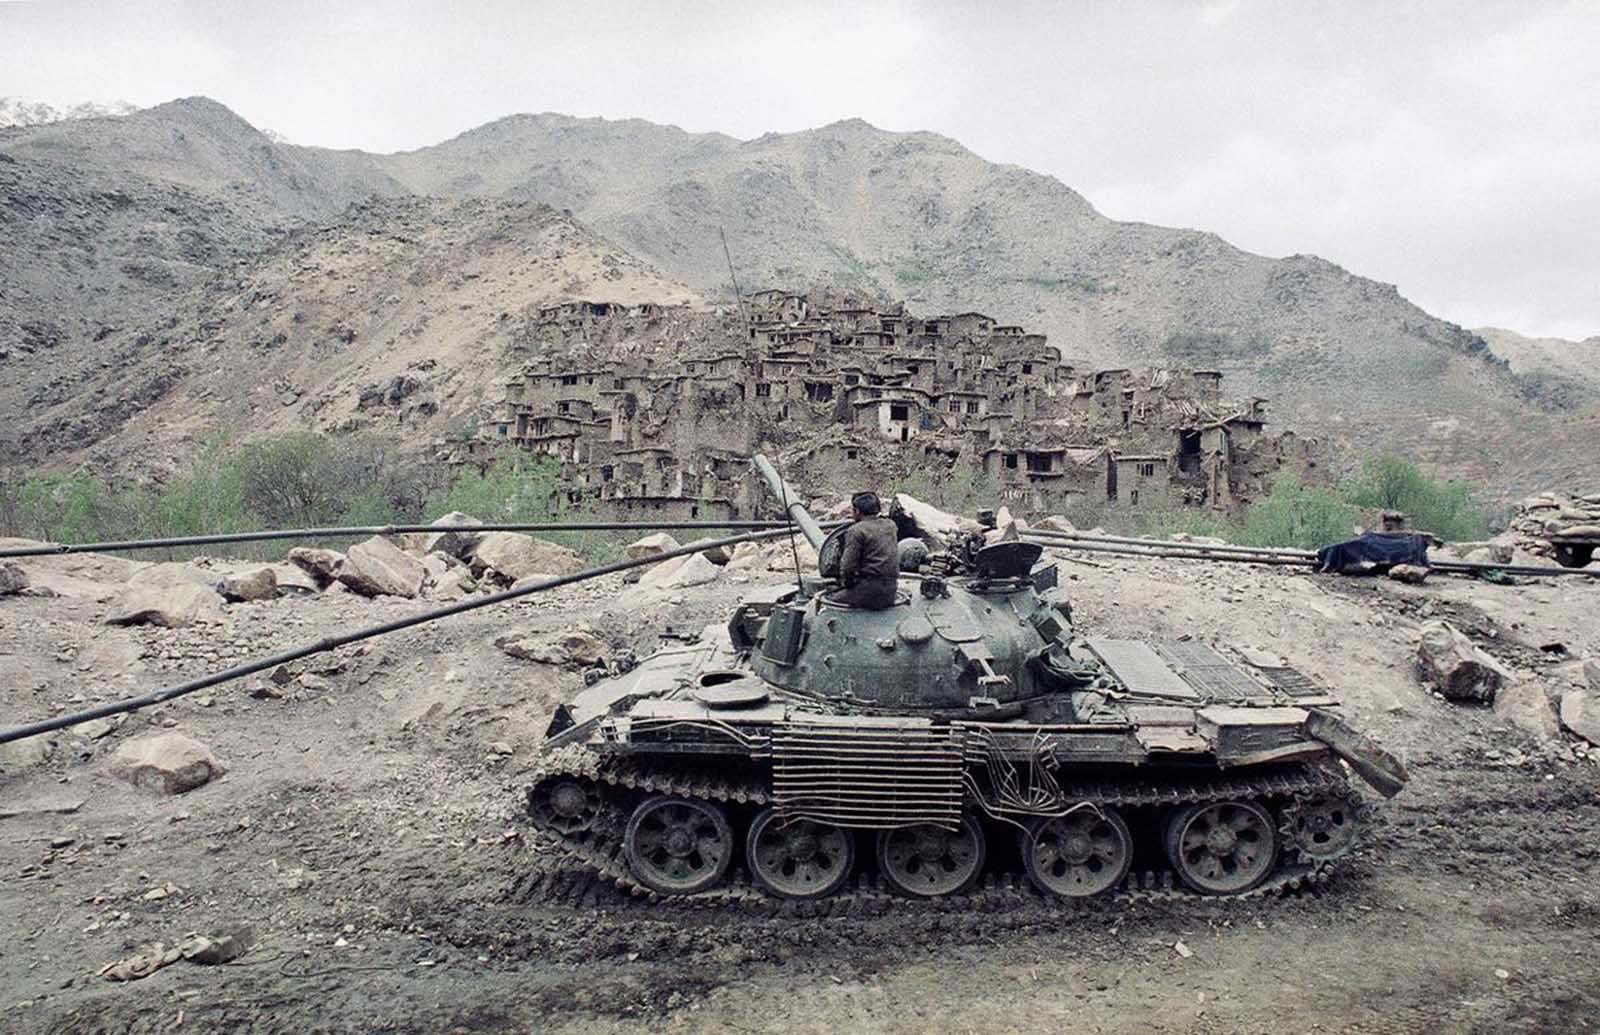 Aftermath in a village located along the Salang Highway, shelled and destroyed during fights between Mujahideen guerrillas and Afghan soldiers in Salang, Afghanistan.